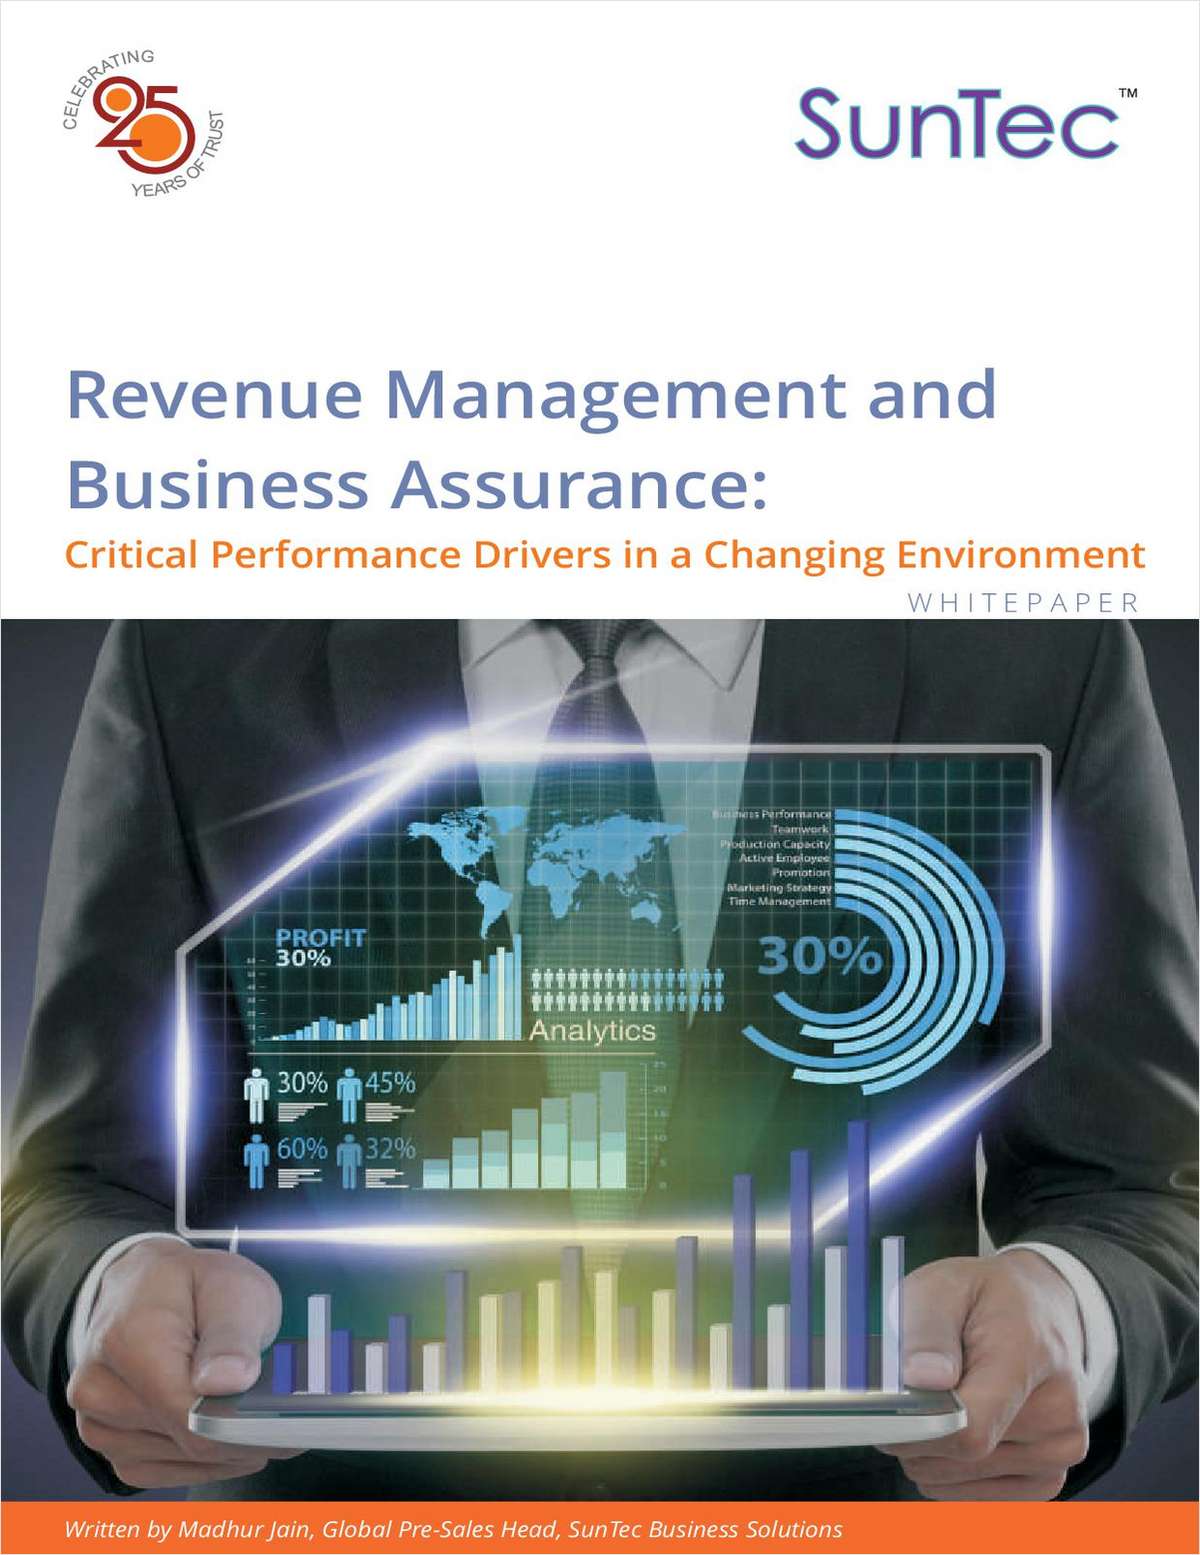 Revenue Management and Business Assurance in Financial Services: Critical Performance Drivers in a Changing Environment